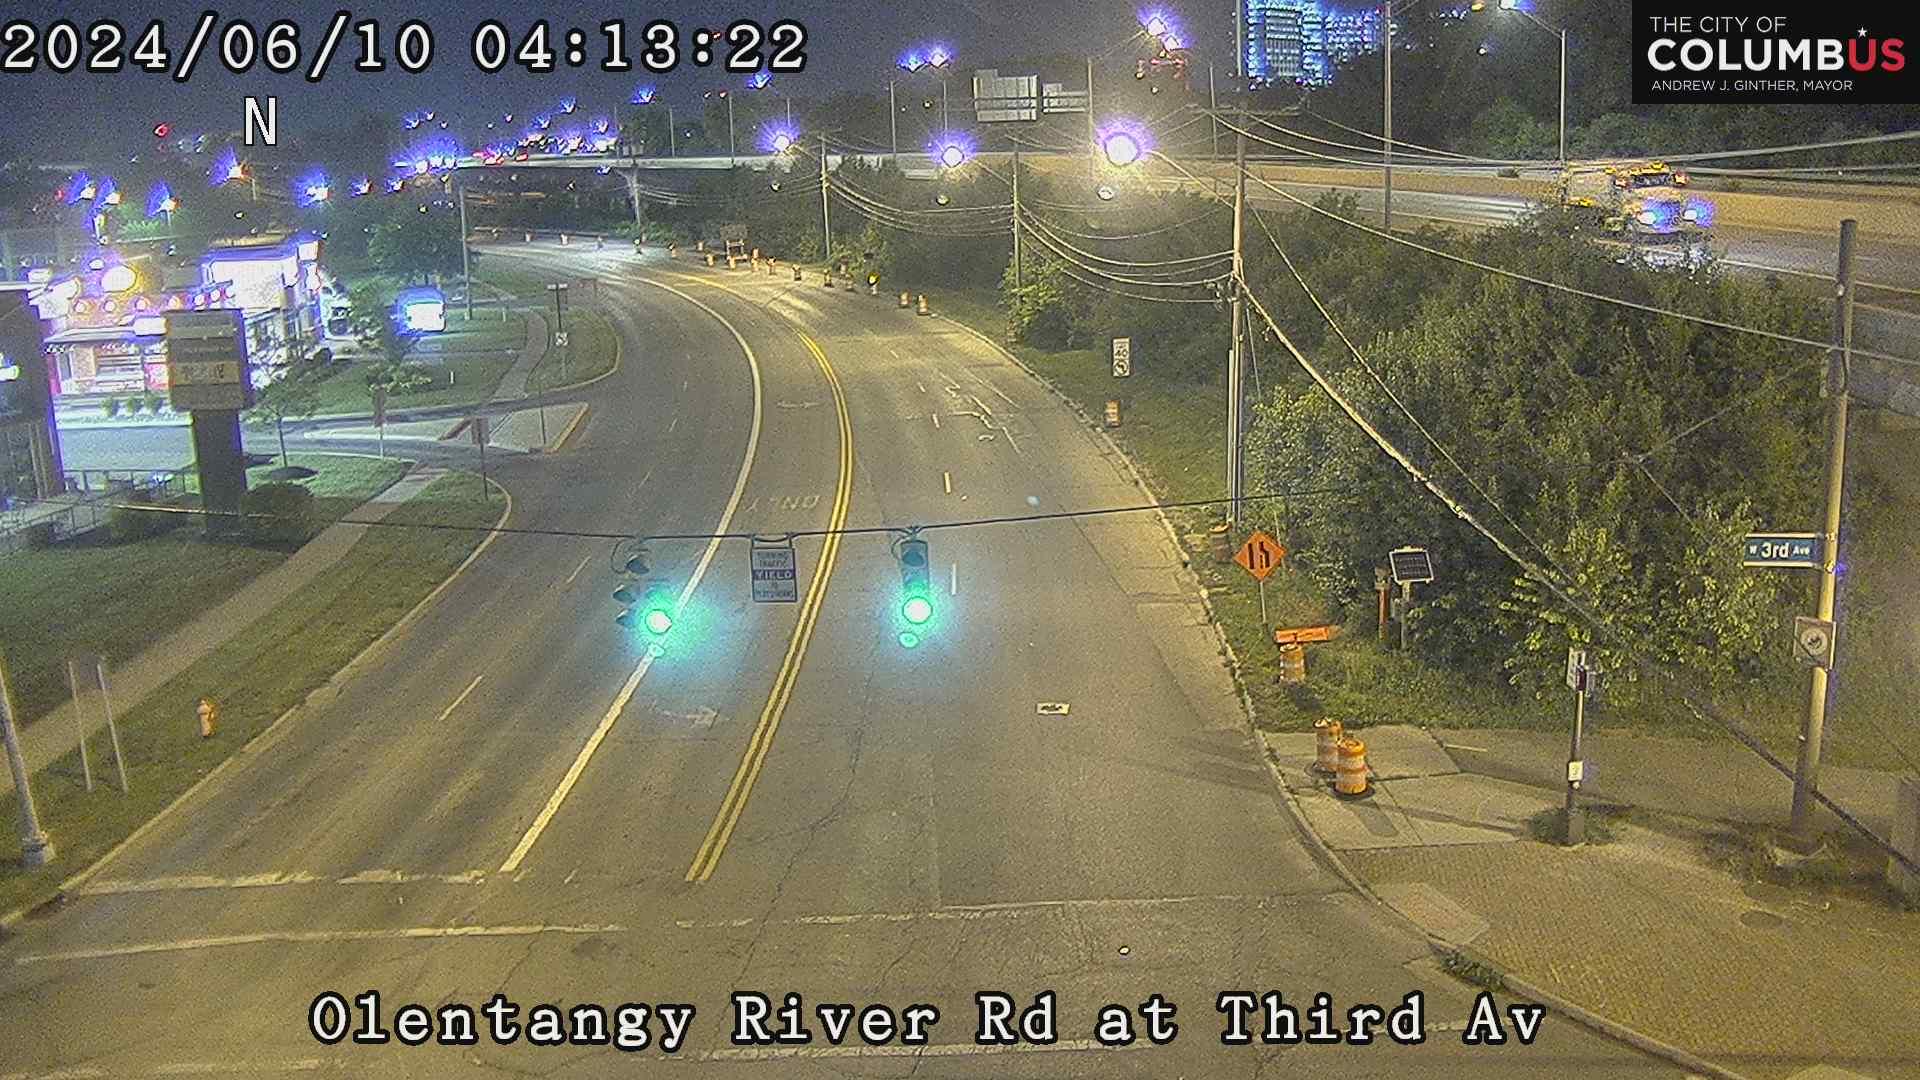 Traffic Cam Harrison West: City of Columbus) Olentangy River Rd at Third Ave